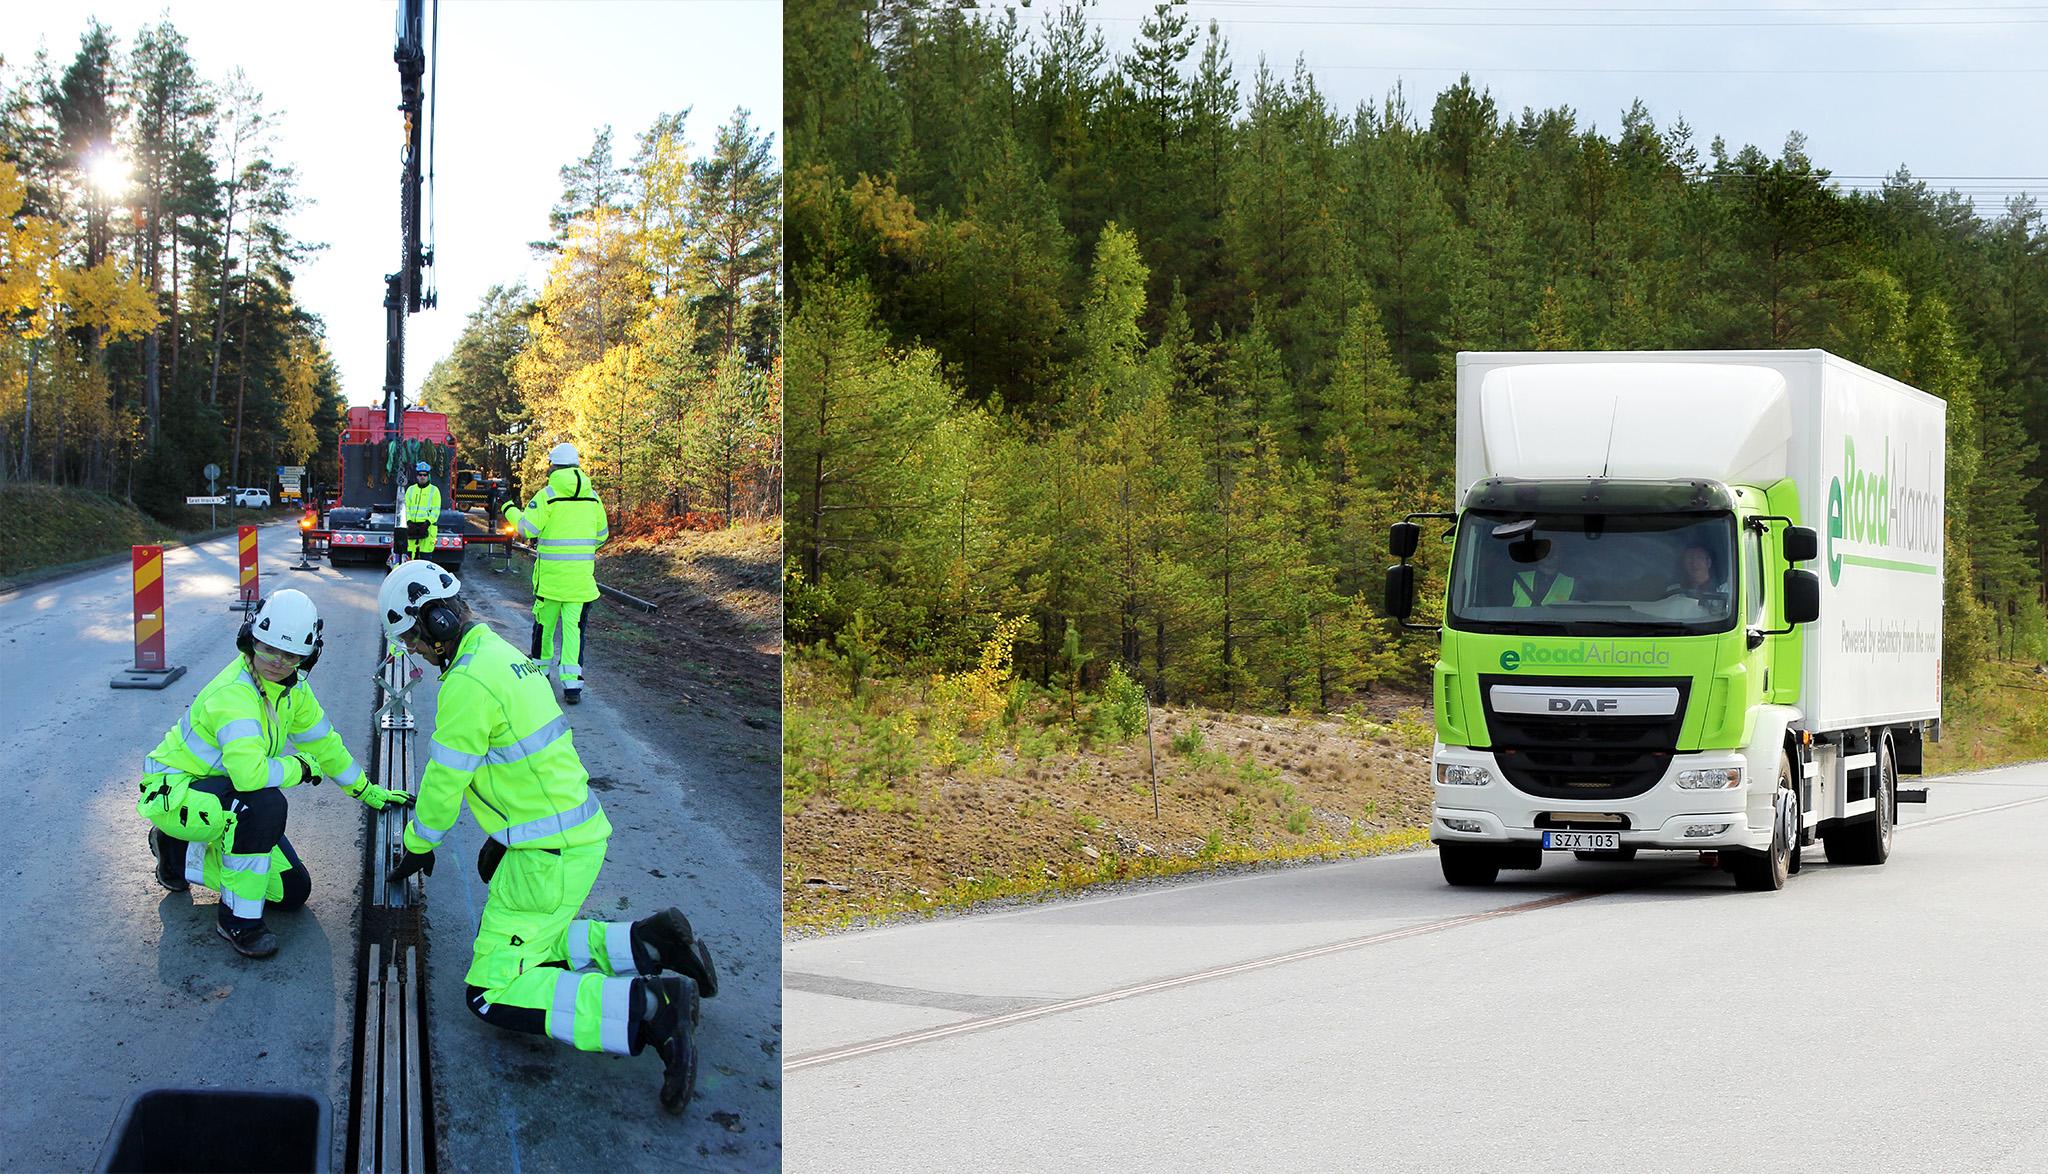 Left: workers installing a rail in a road. Right: An electric lorry driving on the rail. Electrification is one way towards a greener future.